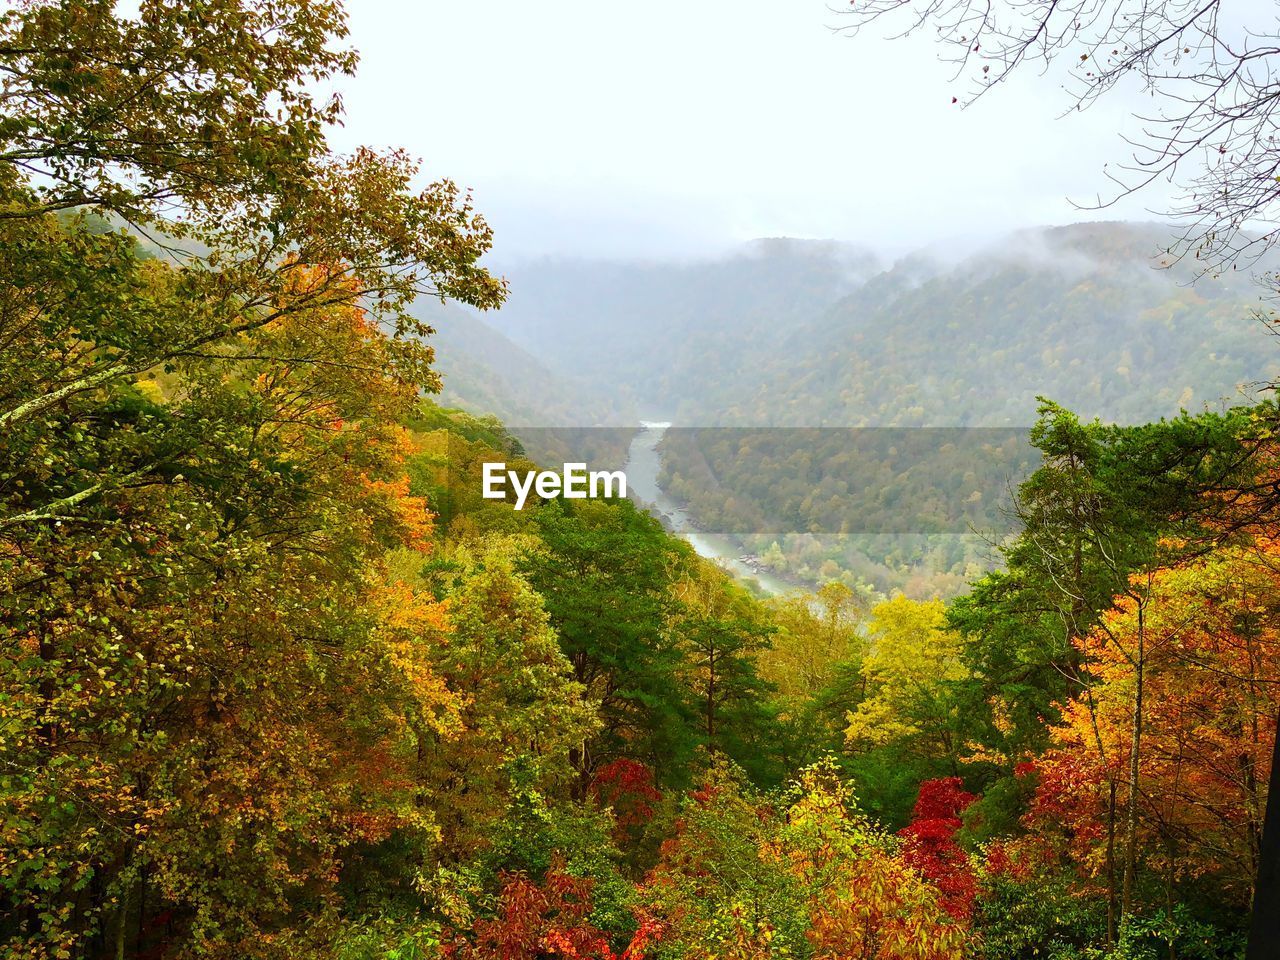 SCENIC VIEW OF FOREST AGAINST SKY DURING AUTUMN